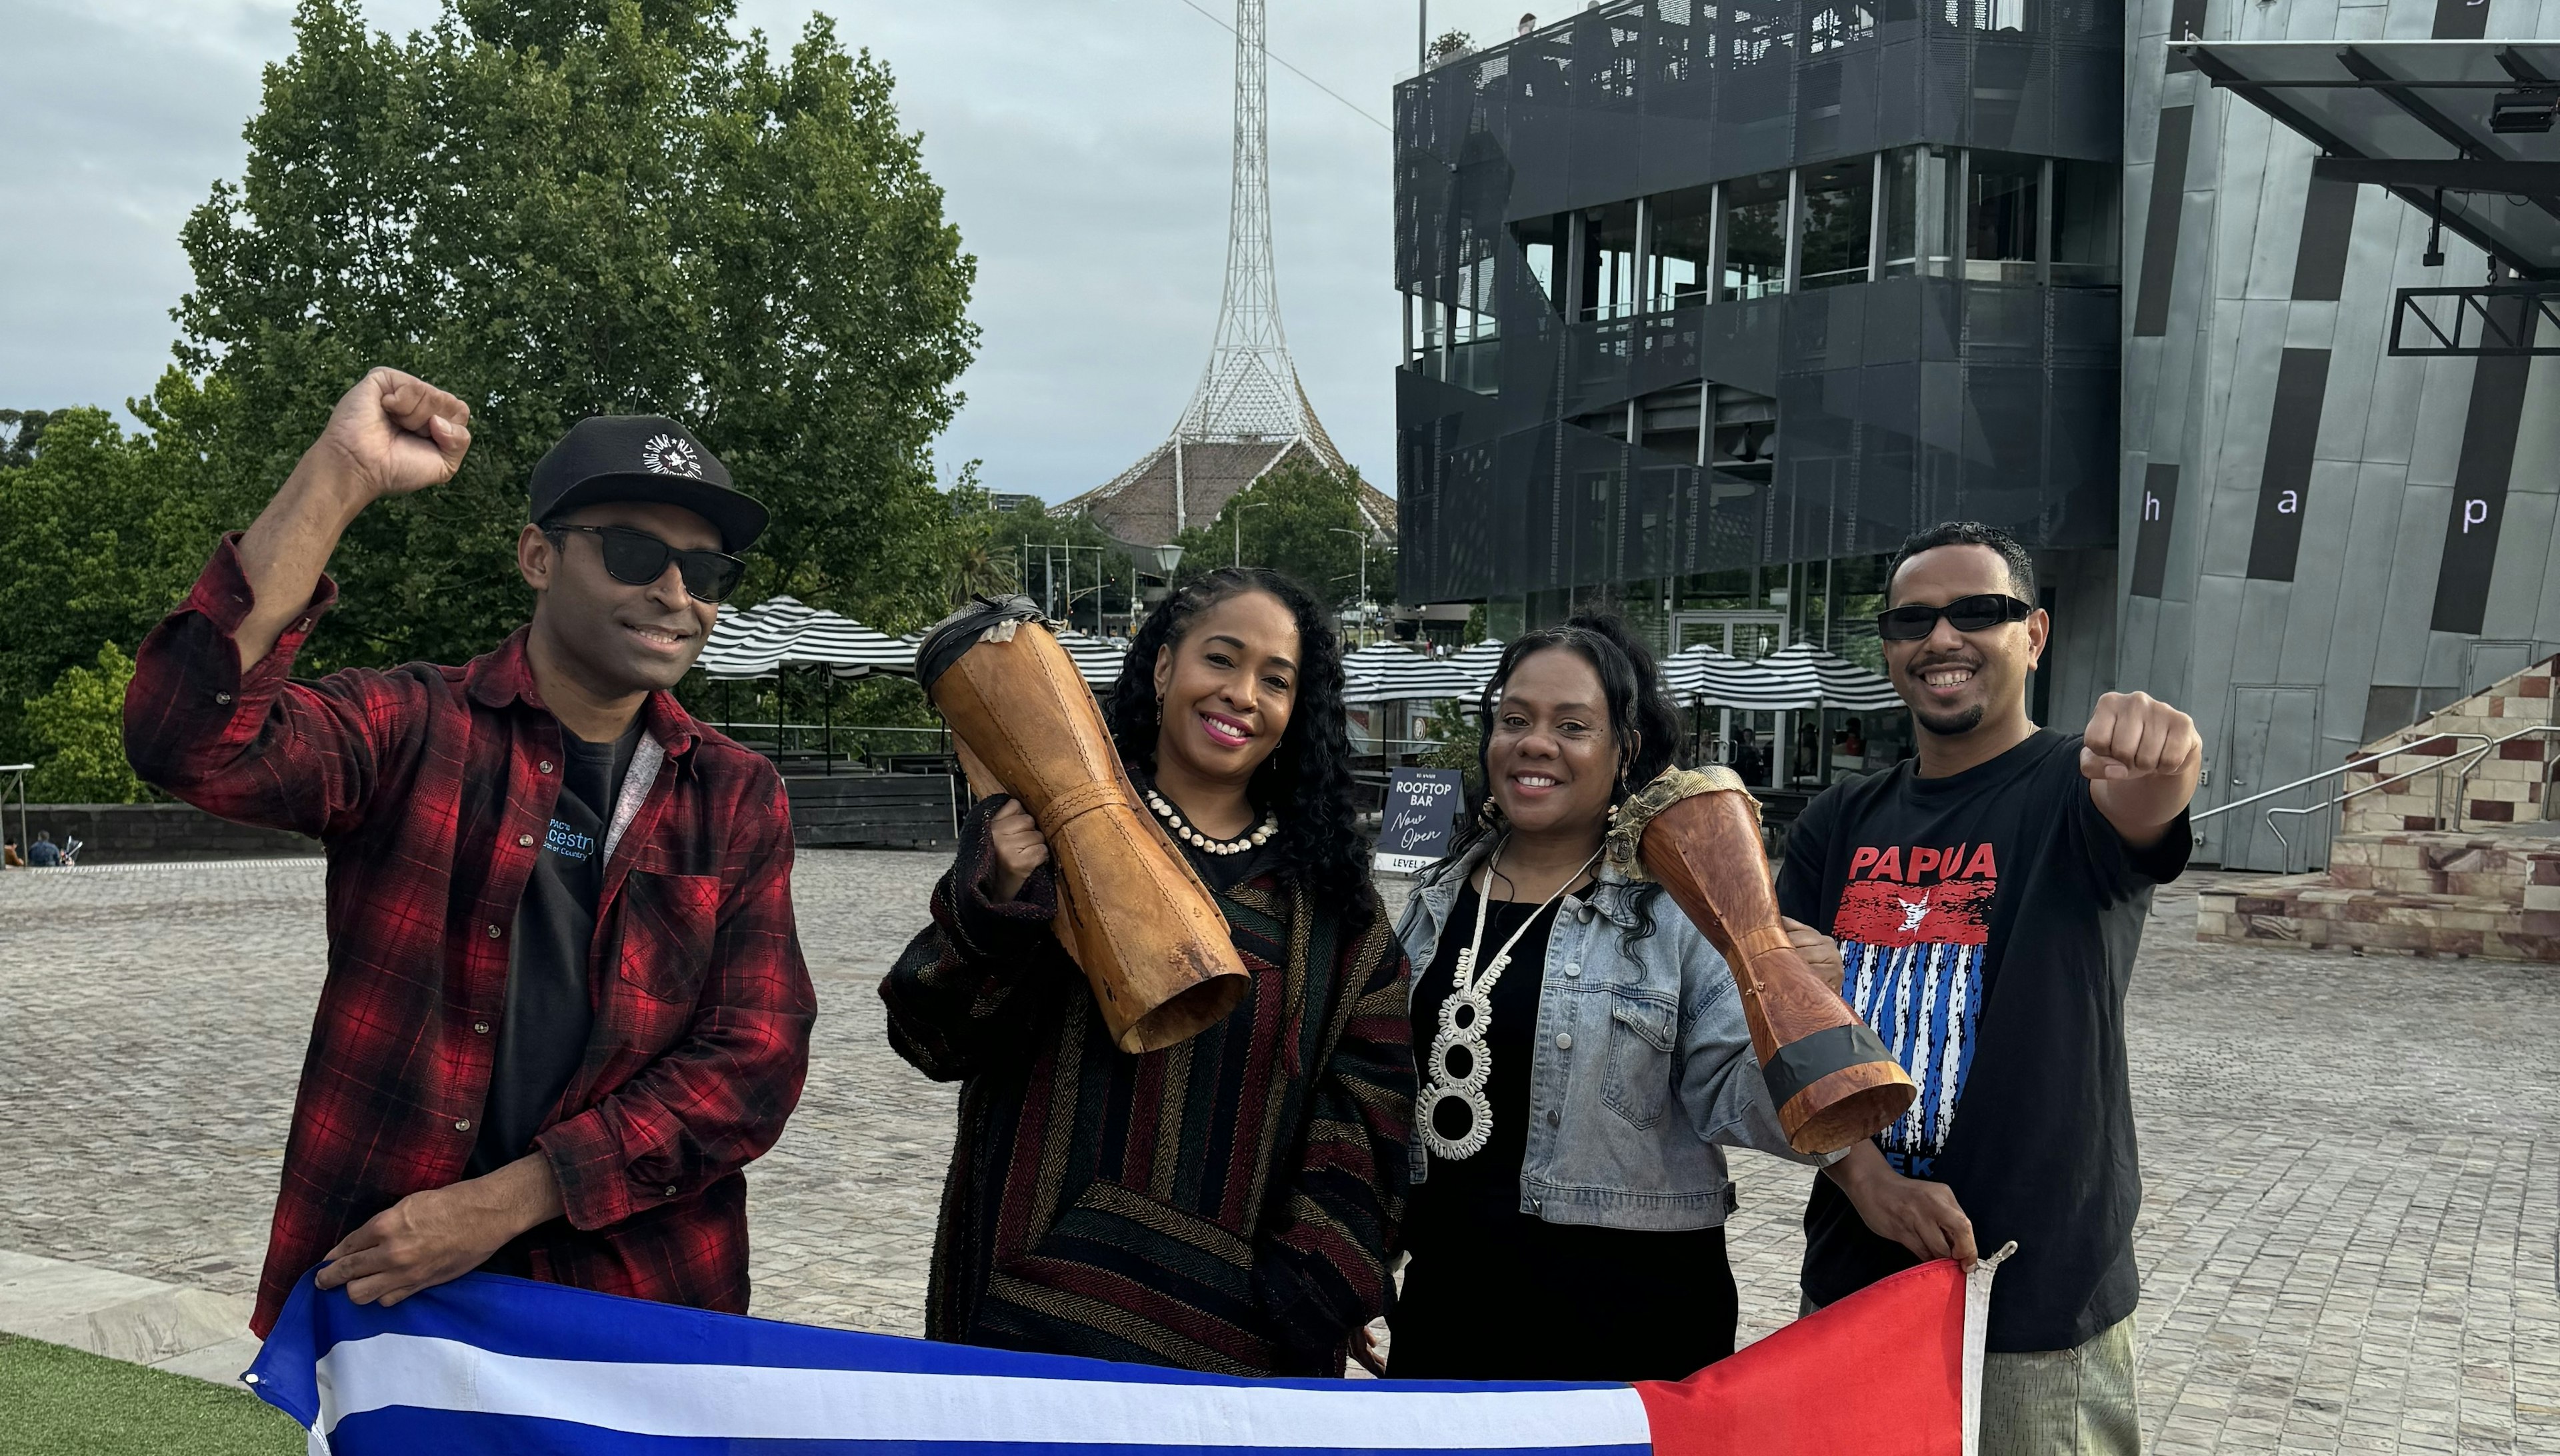 Ronny Kareni, The Black Sistaz and Sam Roem face the camera, smiling, the Arts Centre behind them. The Black Sistaz hold up tifa drums, and Ronny and Sam have their hand in the air, Ronny with his right fist raised. We see the top of a flag they are holding.